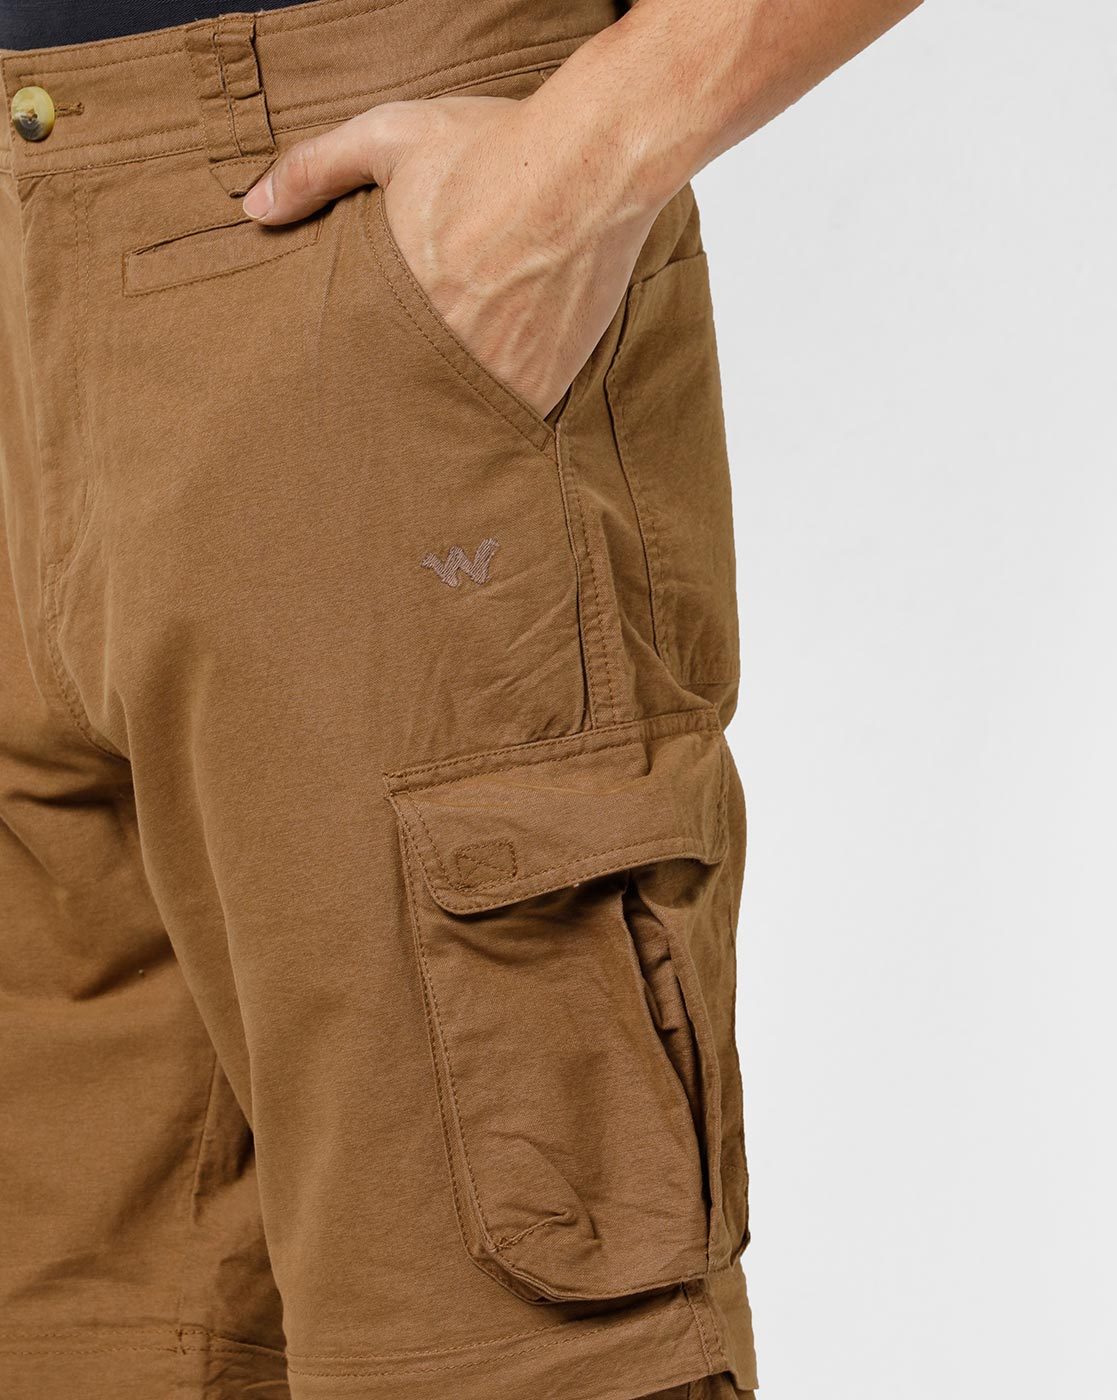 Wildcraft Mens Olive Regular Track Pant Buy Wildcraft Mens Olive Regular  Track Pant Online at Best Price in India  NykaaMan